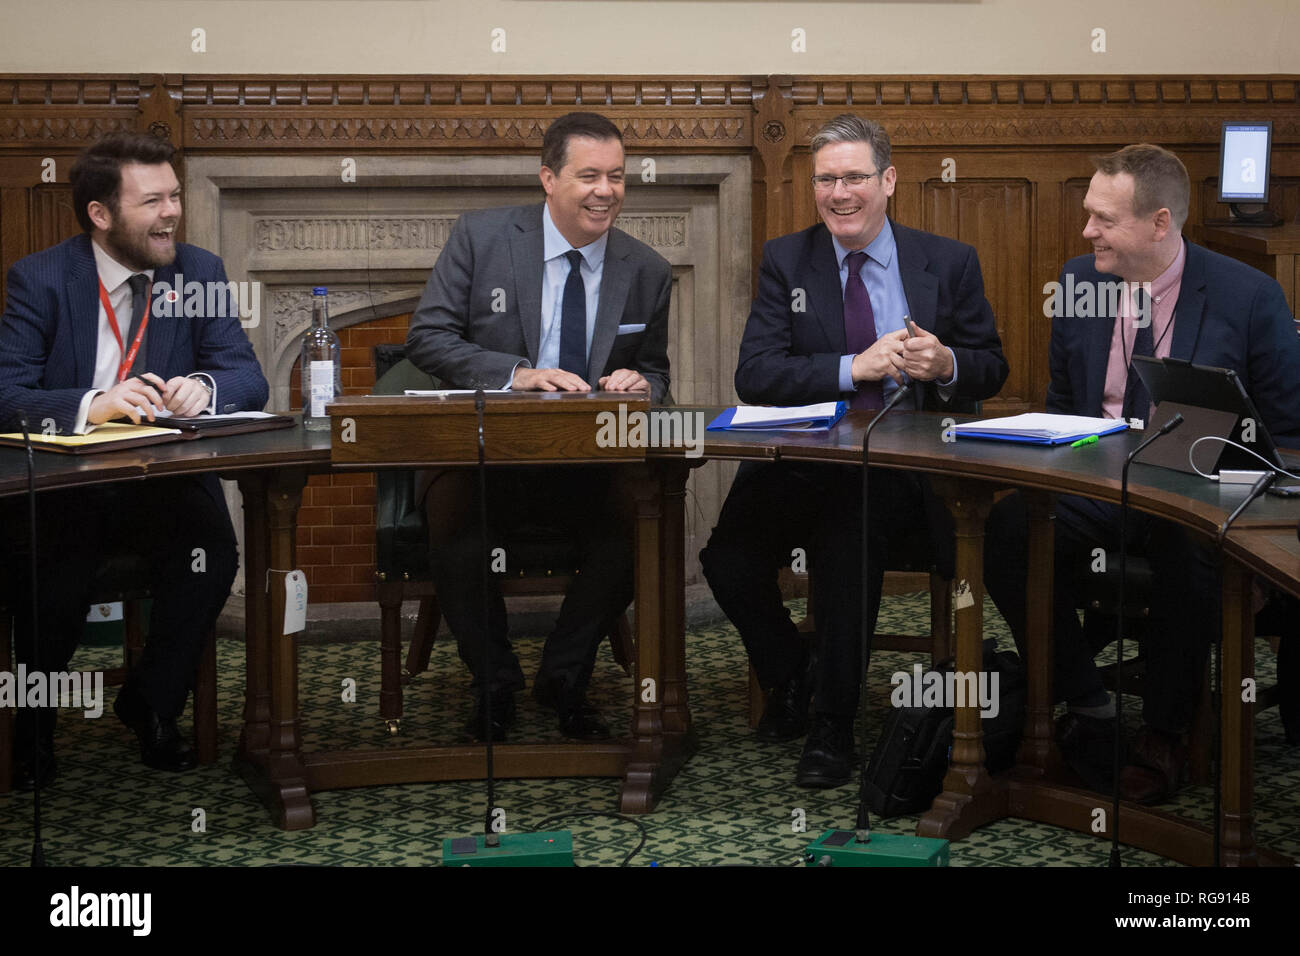 Shadow Brexit secretary Sir Keir Starmer (second right) meets (from left) Labour Party advisor Ruaidhri O'Donnell, Glyn Roberts of Retail NI and Geoff Nuttall of the NI Council for Voluntary Action at the House of Commons as representatives of Northern Ireland's business, farming, trade union, community and voluntary sectors visit Westminster to press for a Brexit deal. Stock Photo